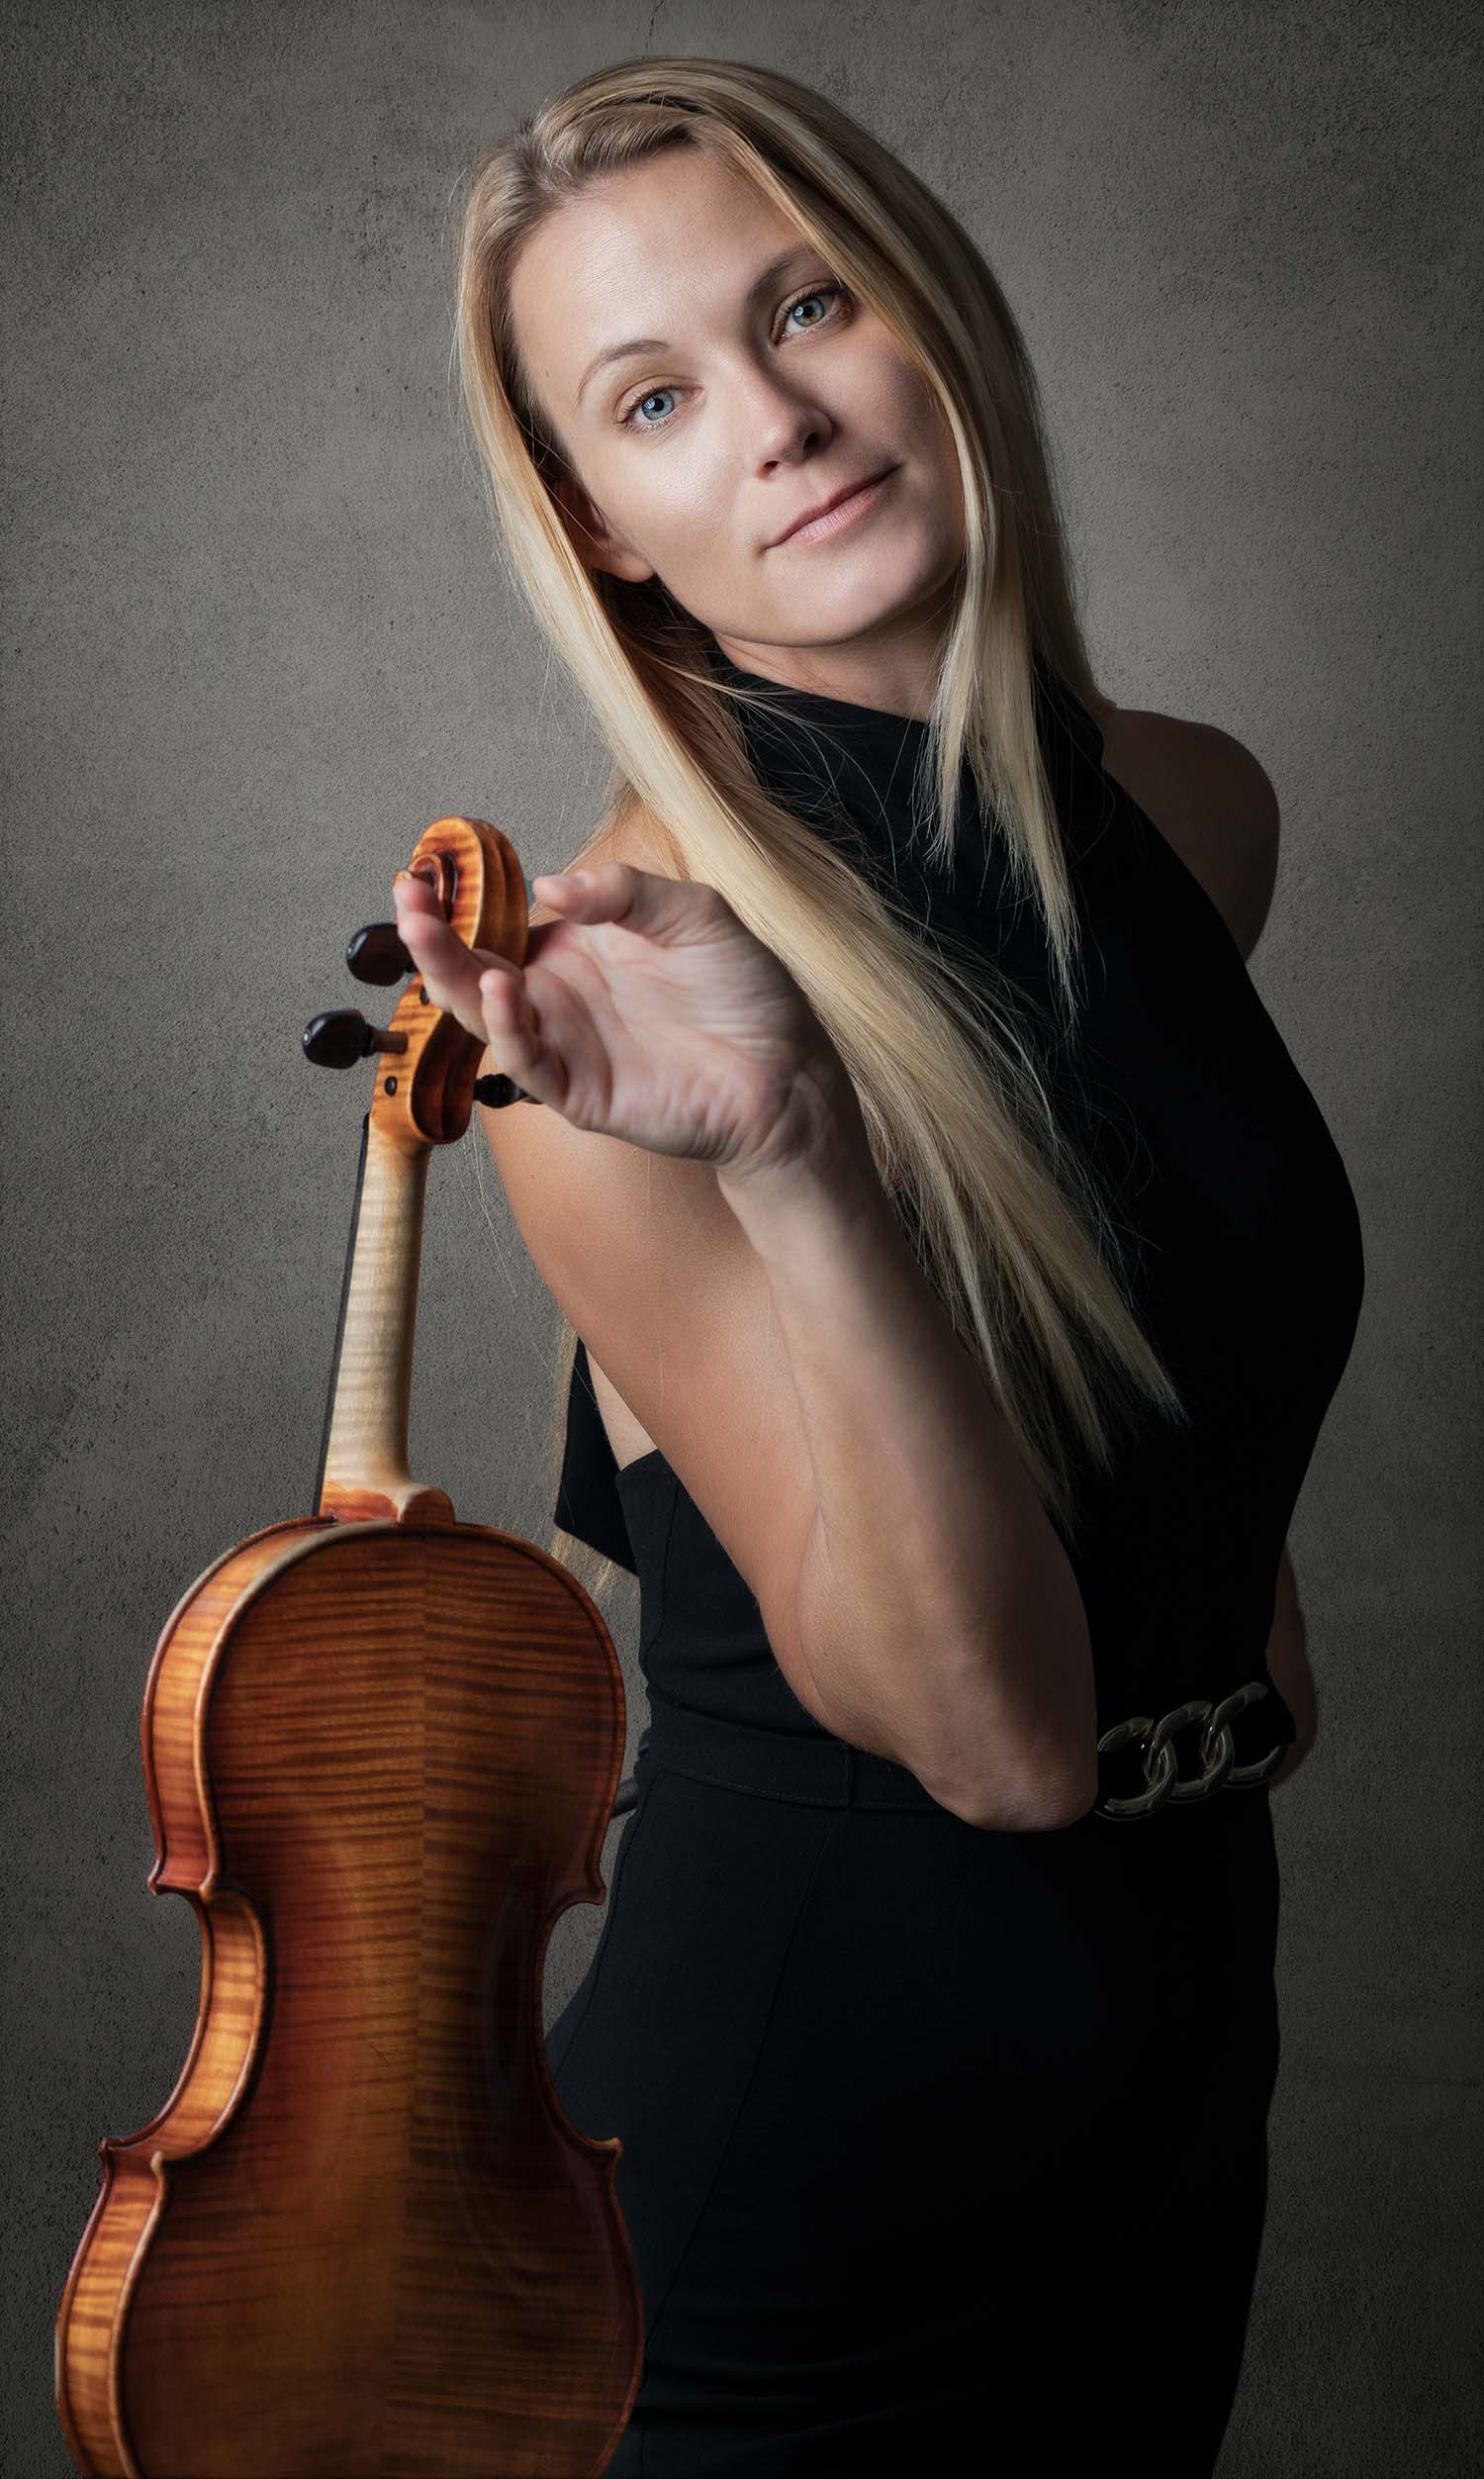 blond violinist with her violin in a black dress